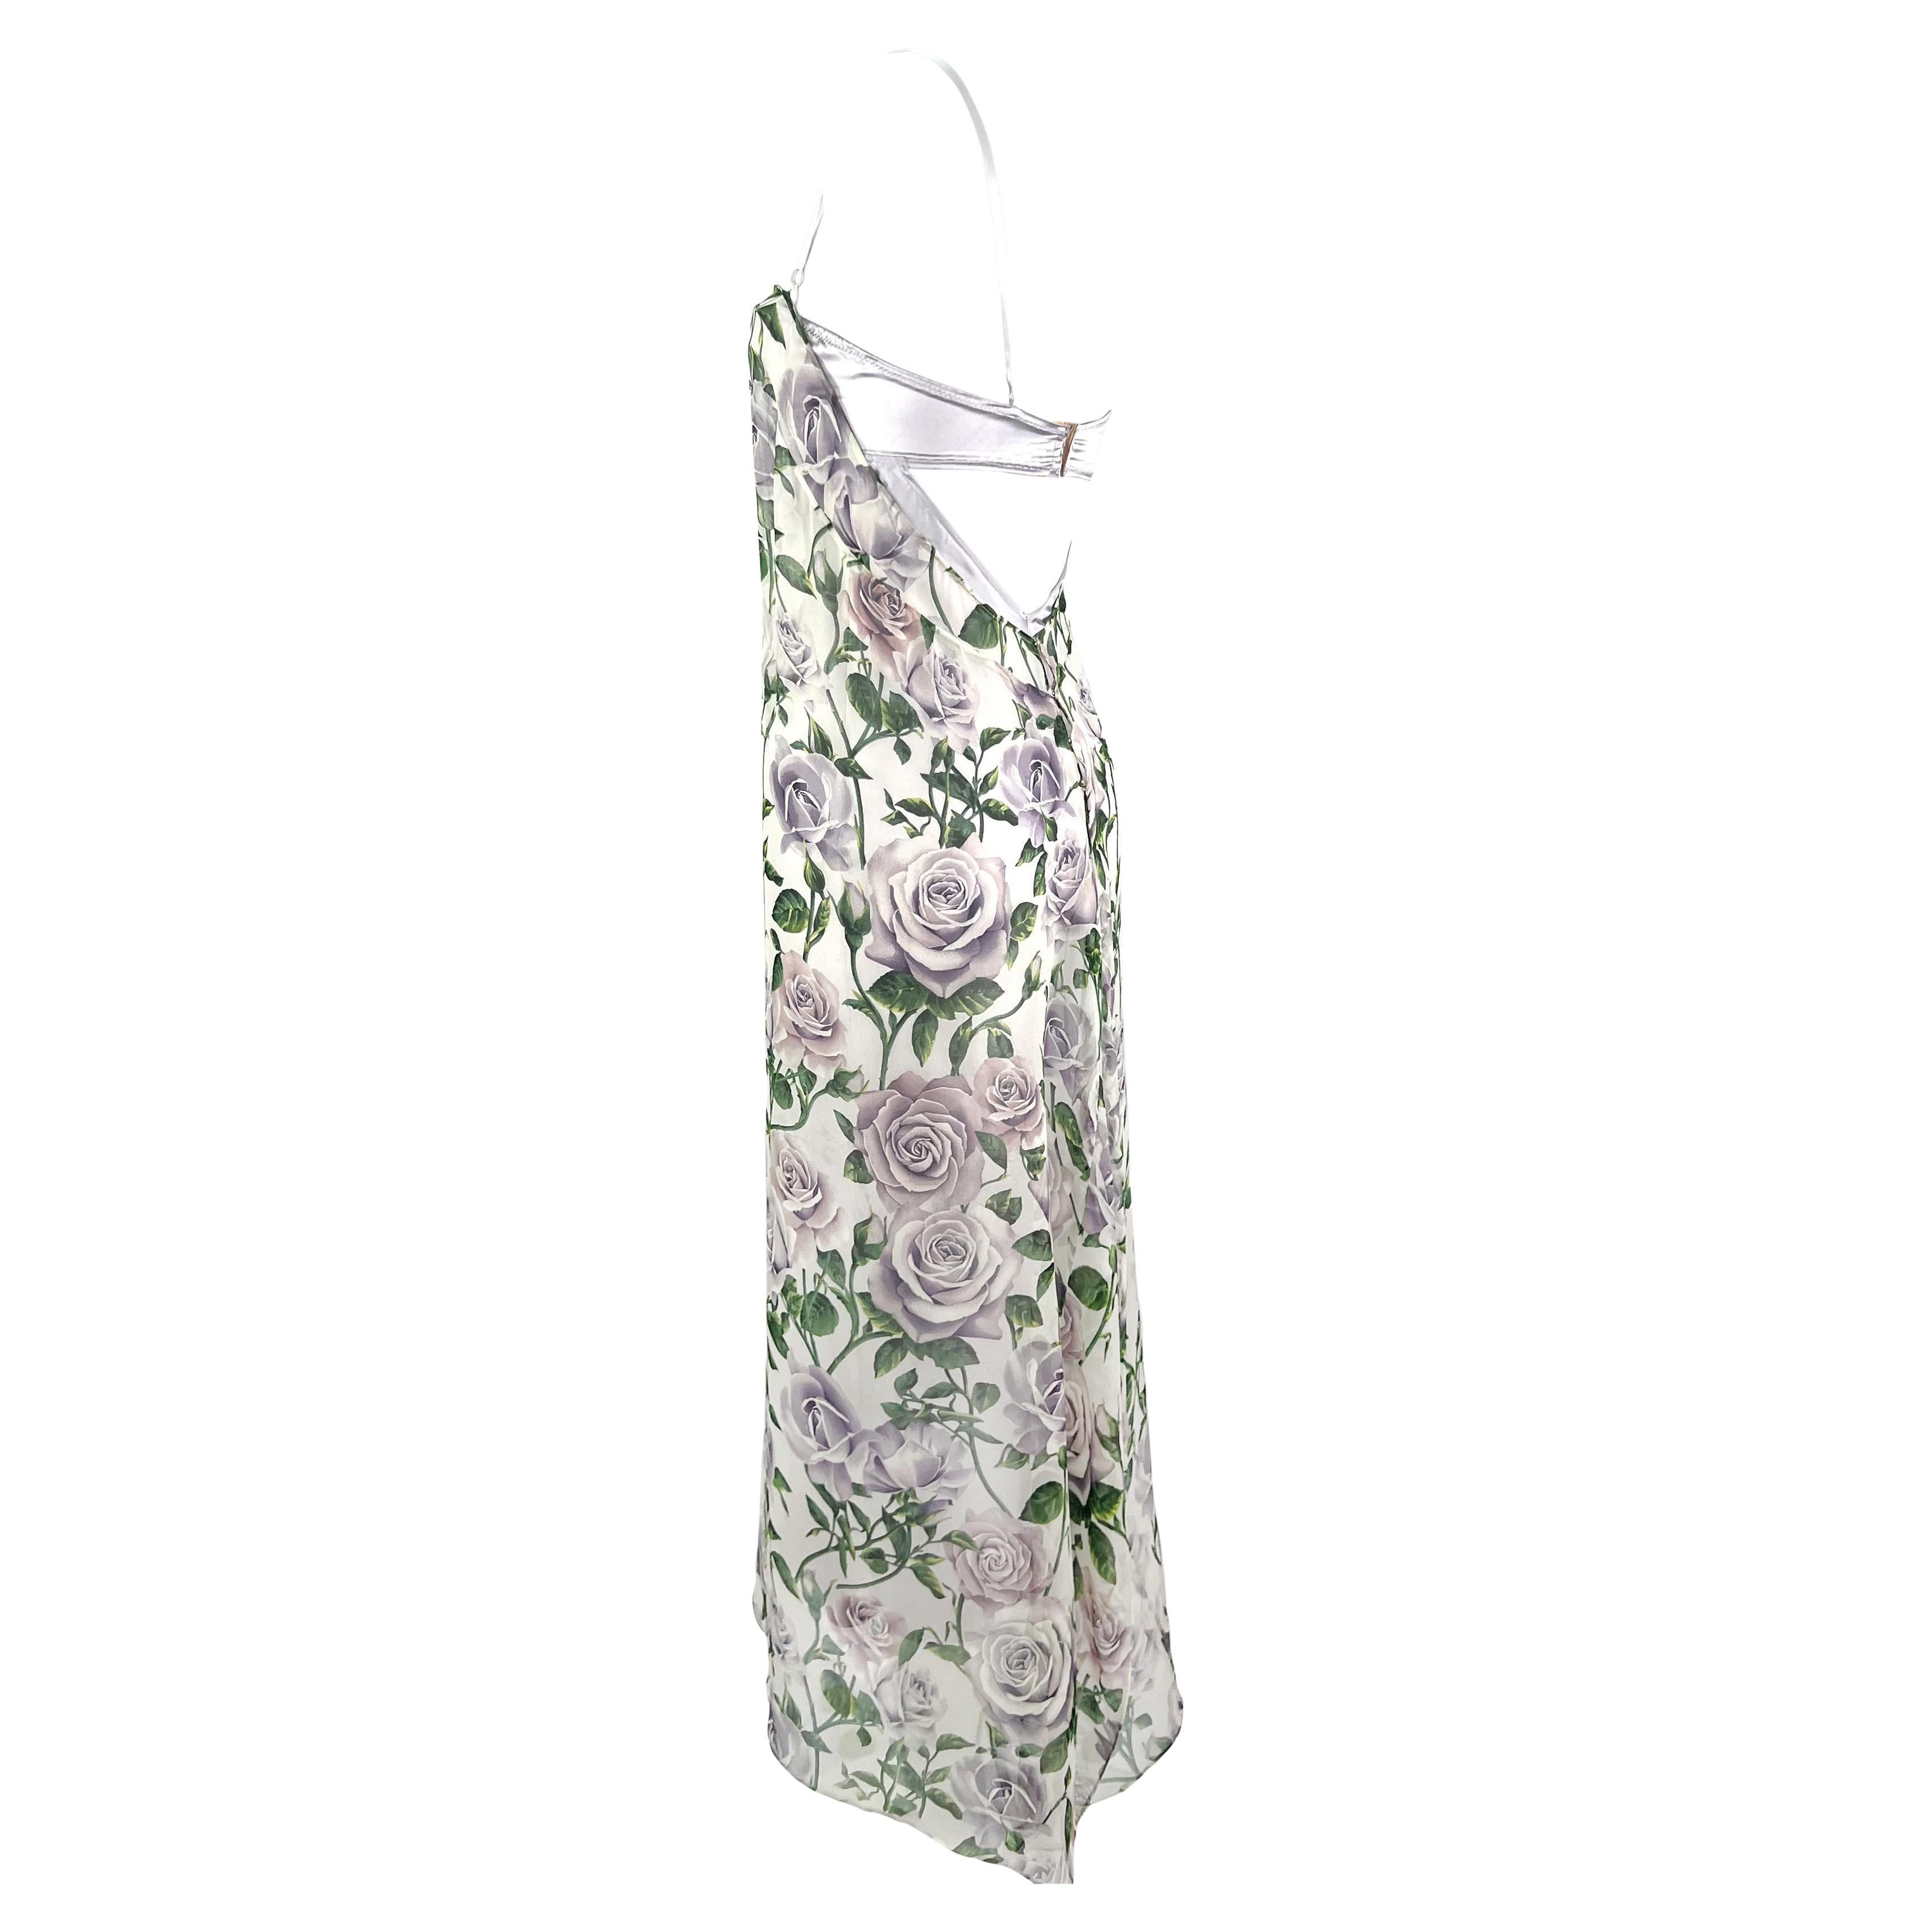 Early 2000s Dolce & Gabbana Sheer Chiffon White Purple Rose Print Overlay Gown For Sale